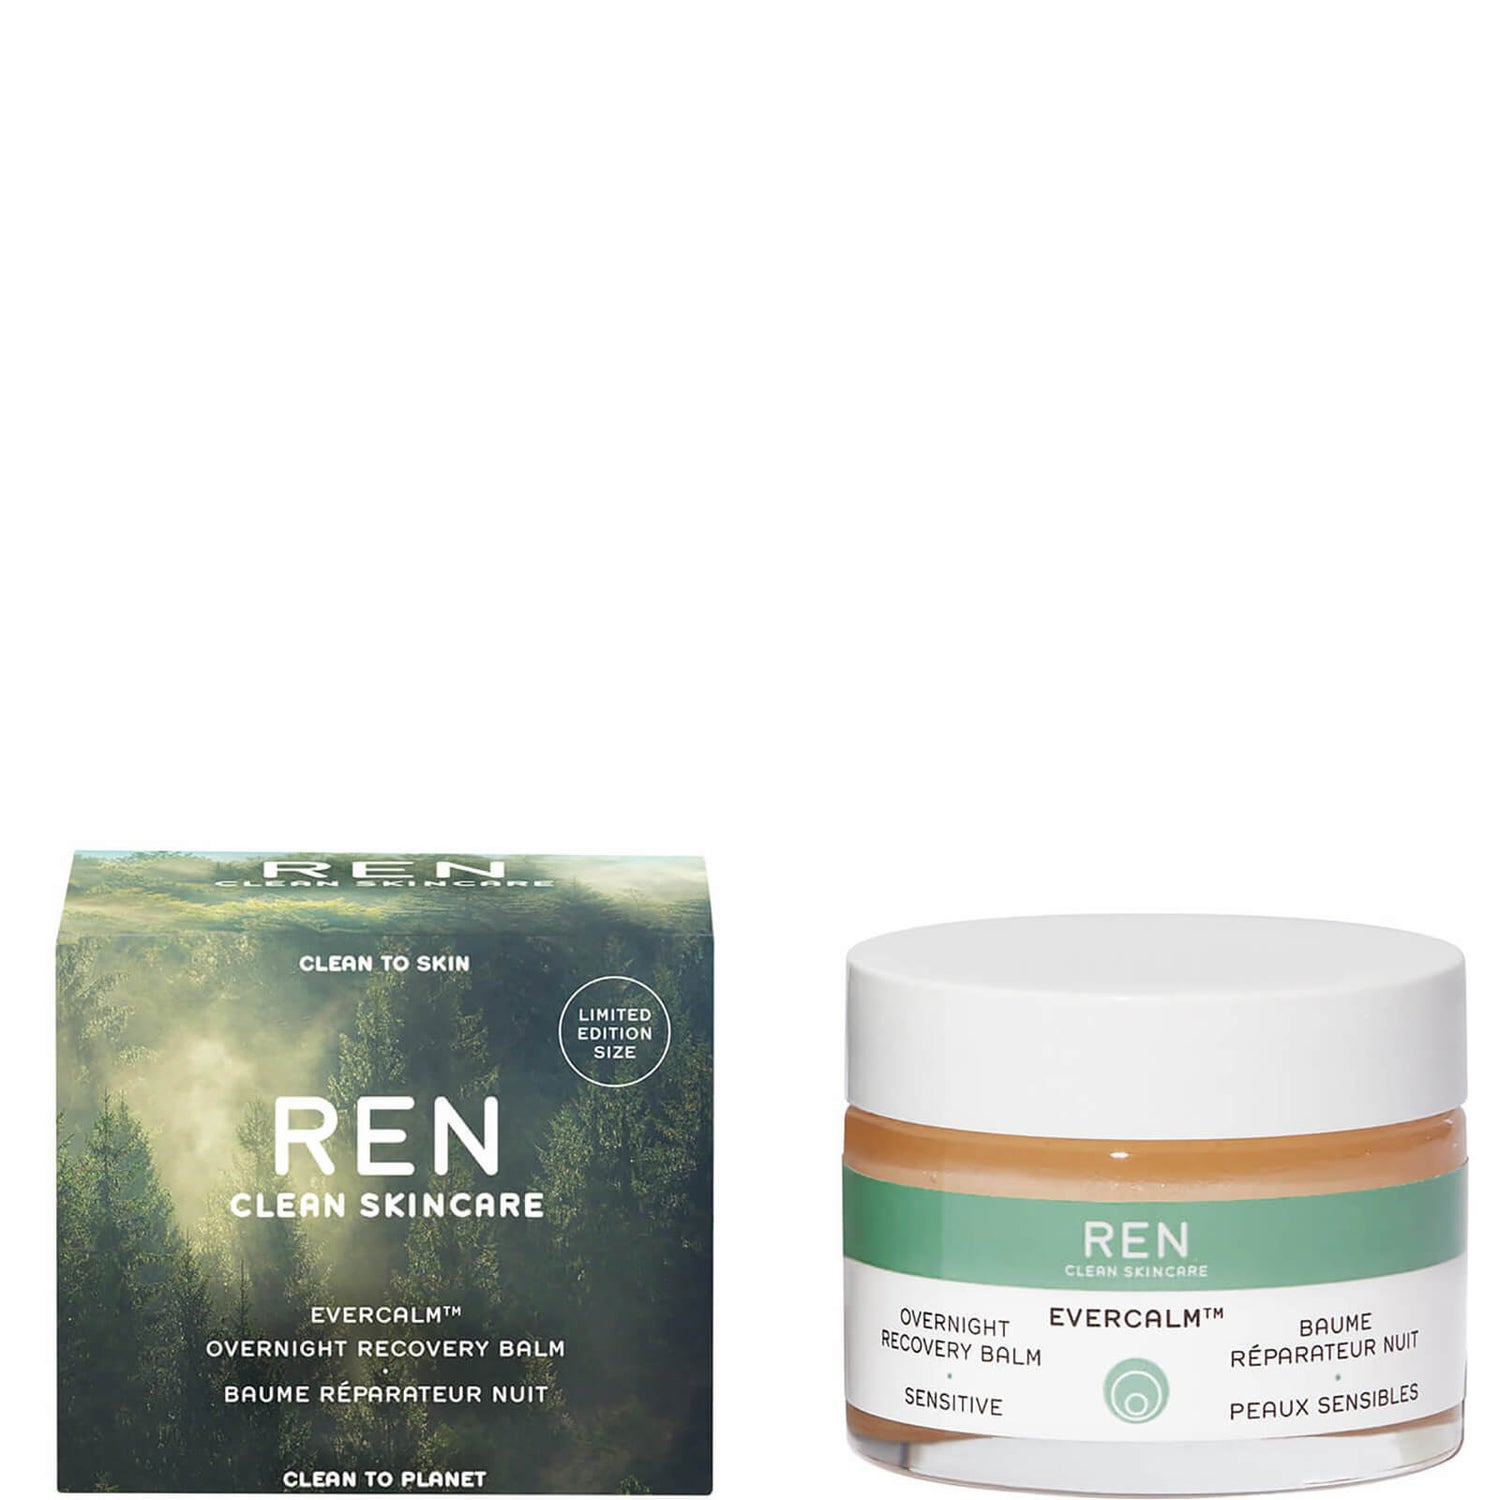 REN Clean Skincare Limited Edition Overnight Recovery Balm 50ml (Worth $82.00)